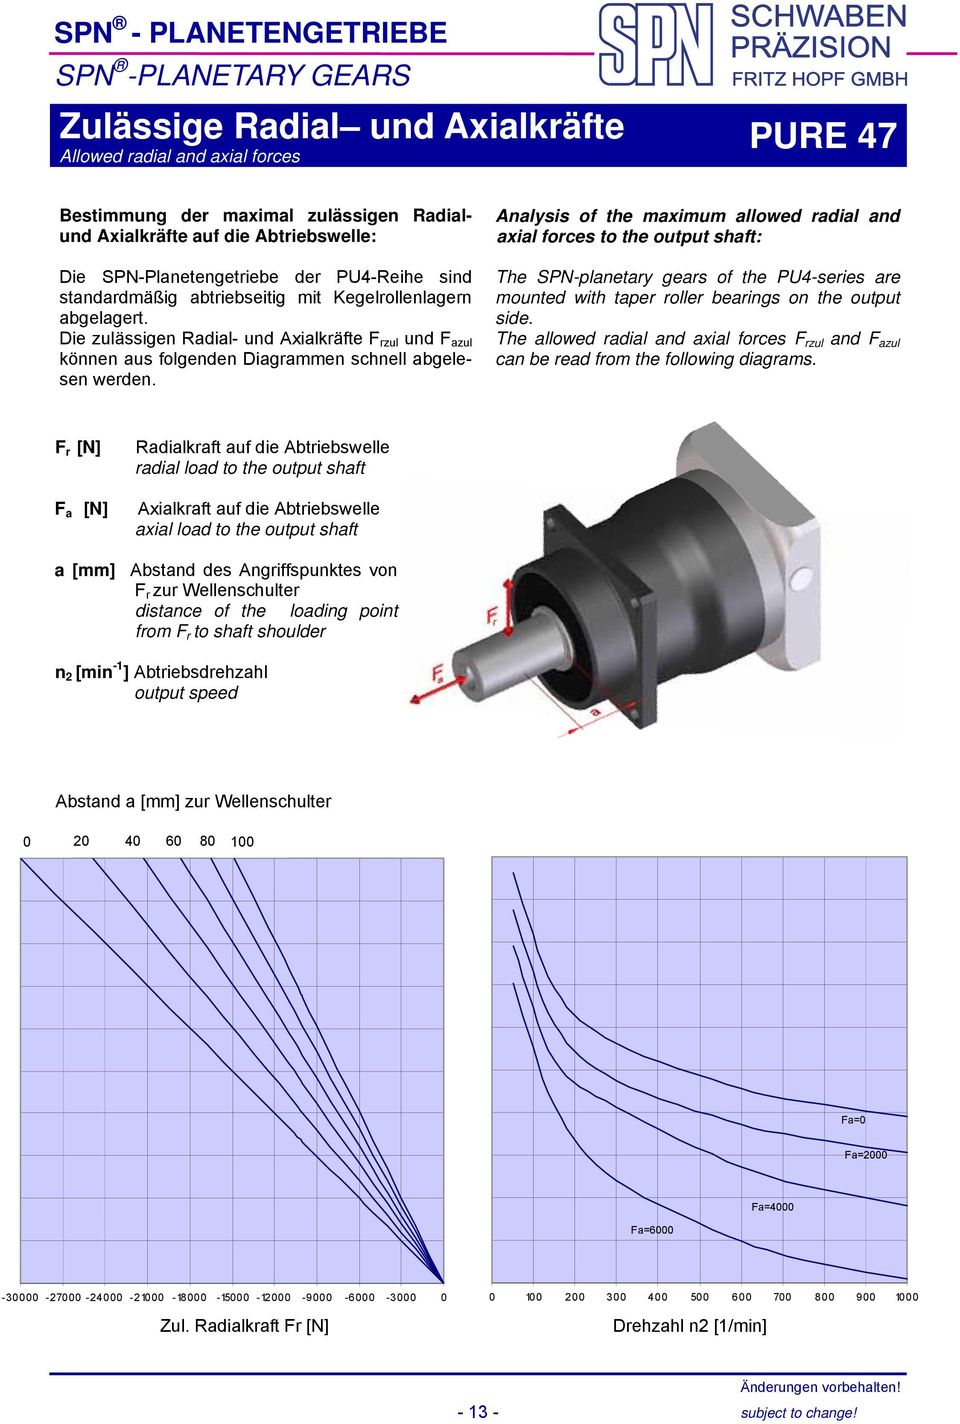 Analysis of the maximum allowed radial and axial forces to the output shaft: The SPN-planetary gears of the PU4-series are mounted with taper roller bearings on the output side.